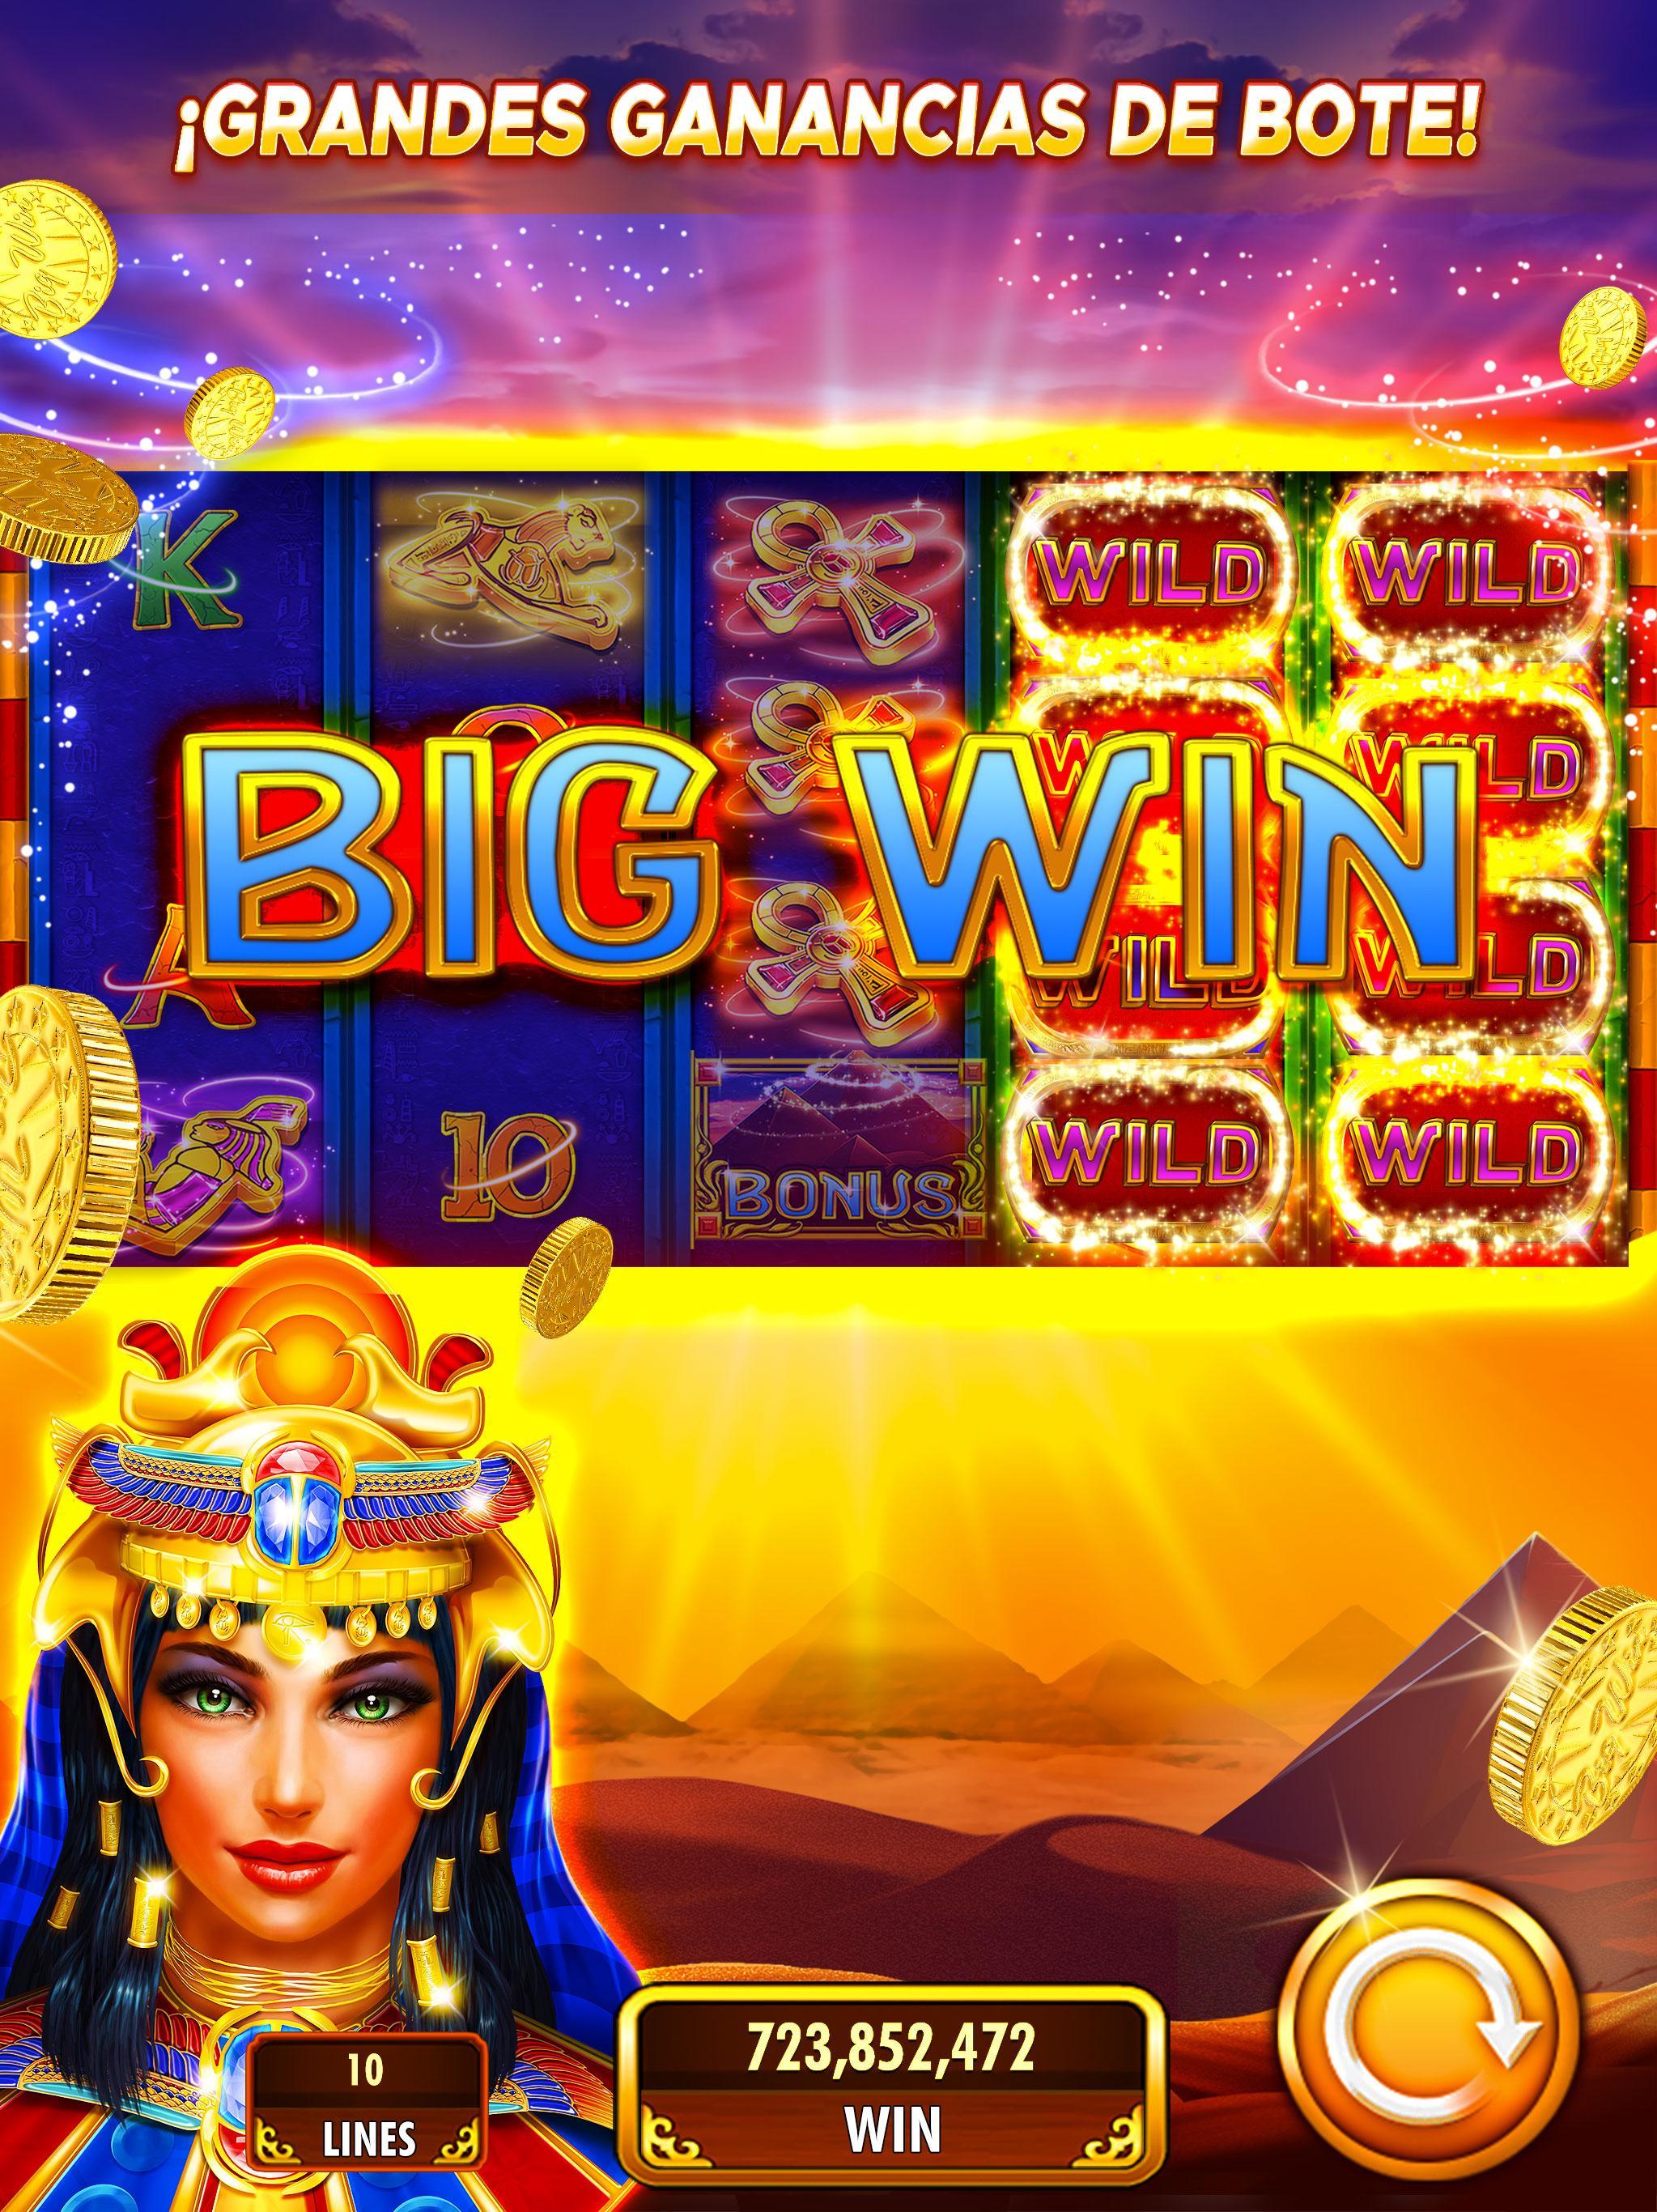 Doubledown casino free online slots Online that play for real money